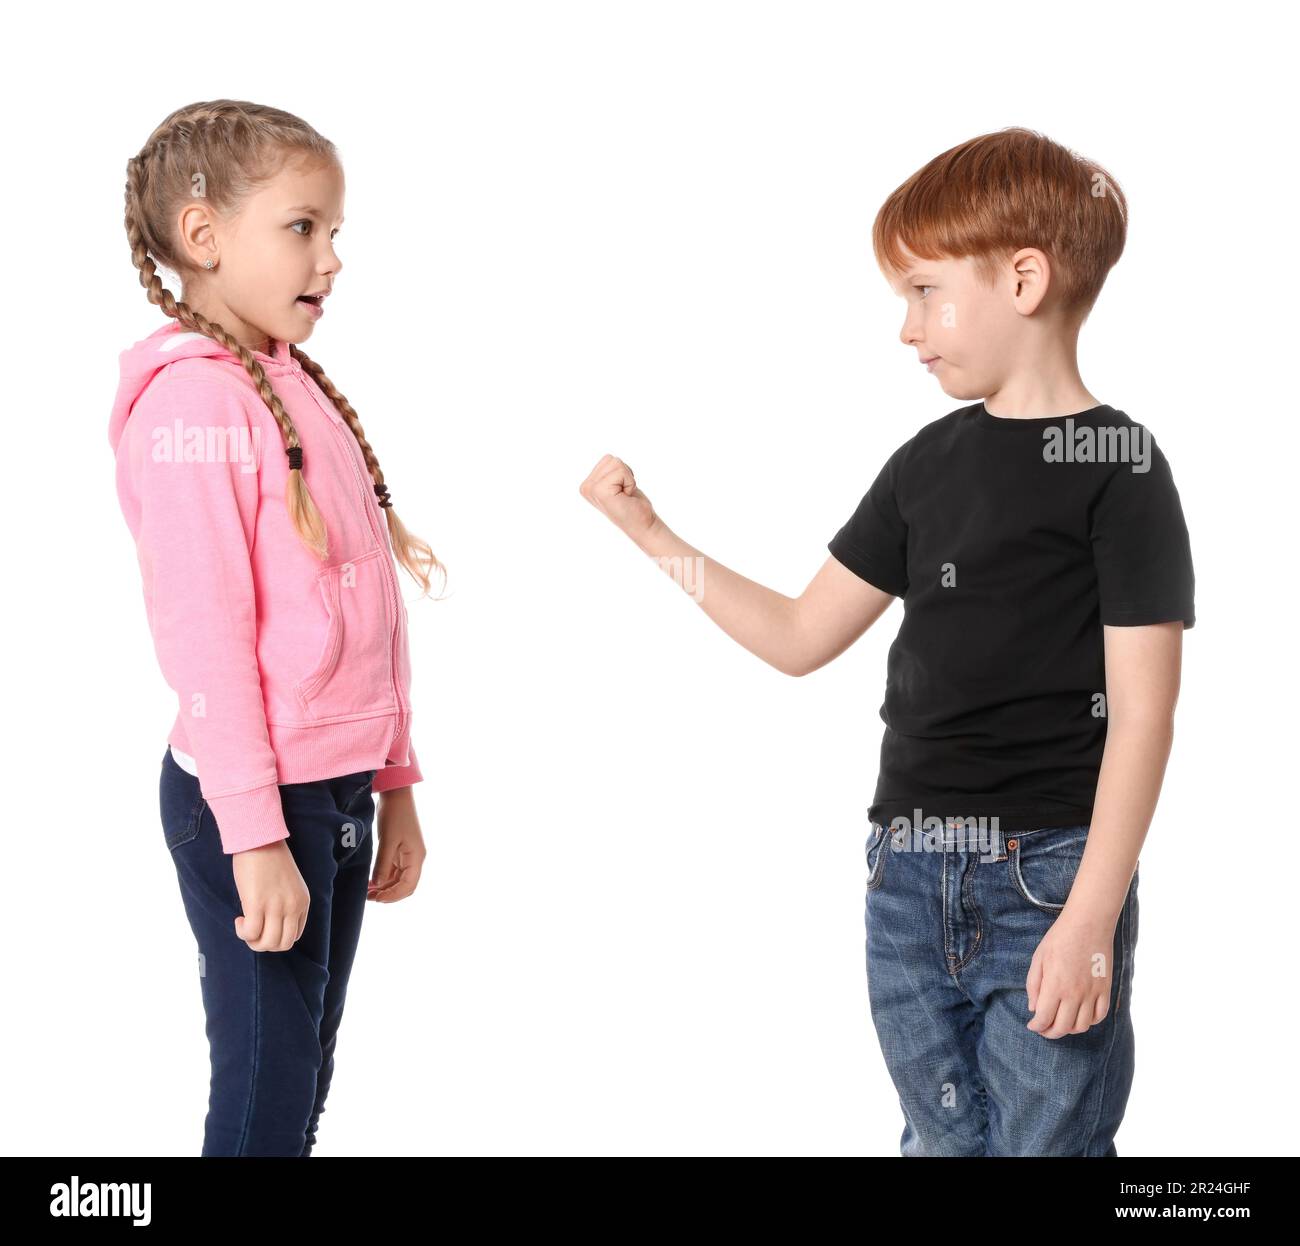 Boy with clenched fist looking at girl on white background. Children's bullying Stock Photo